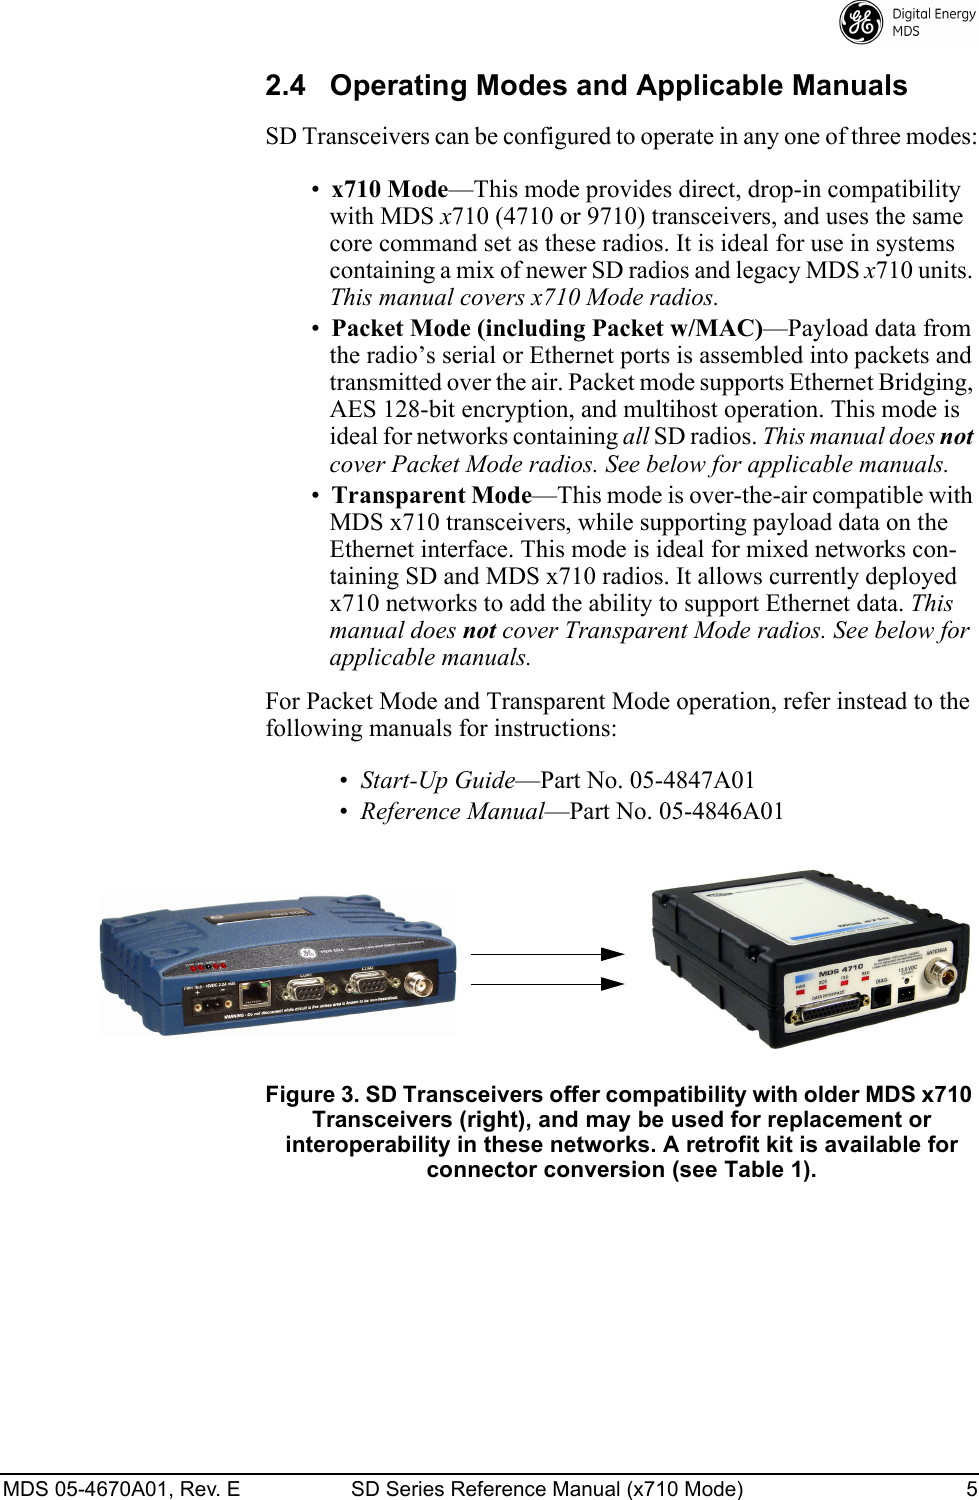 MDS 05-4670A01, Rev. E SD Series Reference Manual (x710 Mode) 5 2.4 Operating Modes and Applicable ManualsSD Transceivers can be configured to operate in any one of three modes:•x710 Mode—This mode provides direct, drop-in compatibility with MDS x710 (4710 or 9710) transceivers, and uses the same core command set as these radios. It is ideal for use in systems containing a mix of newer SD radios and legacy MDS x710 units. This manual covers x710 Mode radios.•Packet Mode (including Packet w/MAC)—Payload data from the radio’s serial or Ethernet ports is assembled into packets and transmitted over the air. Packet mode supports Ethernet Bridging, AES 128-bit encryption, and multihost operation. This mode is ideal for networks containing all SD radios. This manual does not cover Packet Mode radios. See below for applicable manuals.•Transparent Mode—This mode is over-the-air compatible with MDS x710 transceivers, while supporting payload data on the Ethernet interface. This mode is ideal for mixed networks con-taining SD and MDS x710 radios. It allows currently deployed x710 networks to add the ability to support Ethernet data. This manual does not cover Transparent Mode radios. See below for applicable manuals.For Packet Mode and Transparent Mode operation, refer instead to the following manuals for instructions:•Start-Up Guide—Part No. 05-4847A01•Reference Manual—Part No. 05-4846A01Invisible place holderFigure 3. SD Transceivers offer compatibility with older MDS x710 Transceivers (right), and may be used for replacement or interoperability in these networks. A retrofit kit is available for connector conversion (see Table 1).